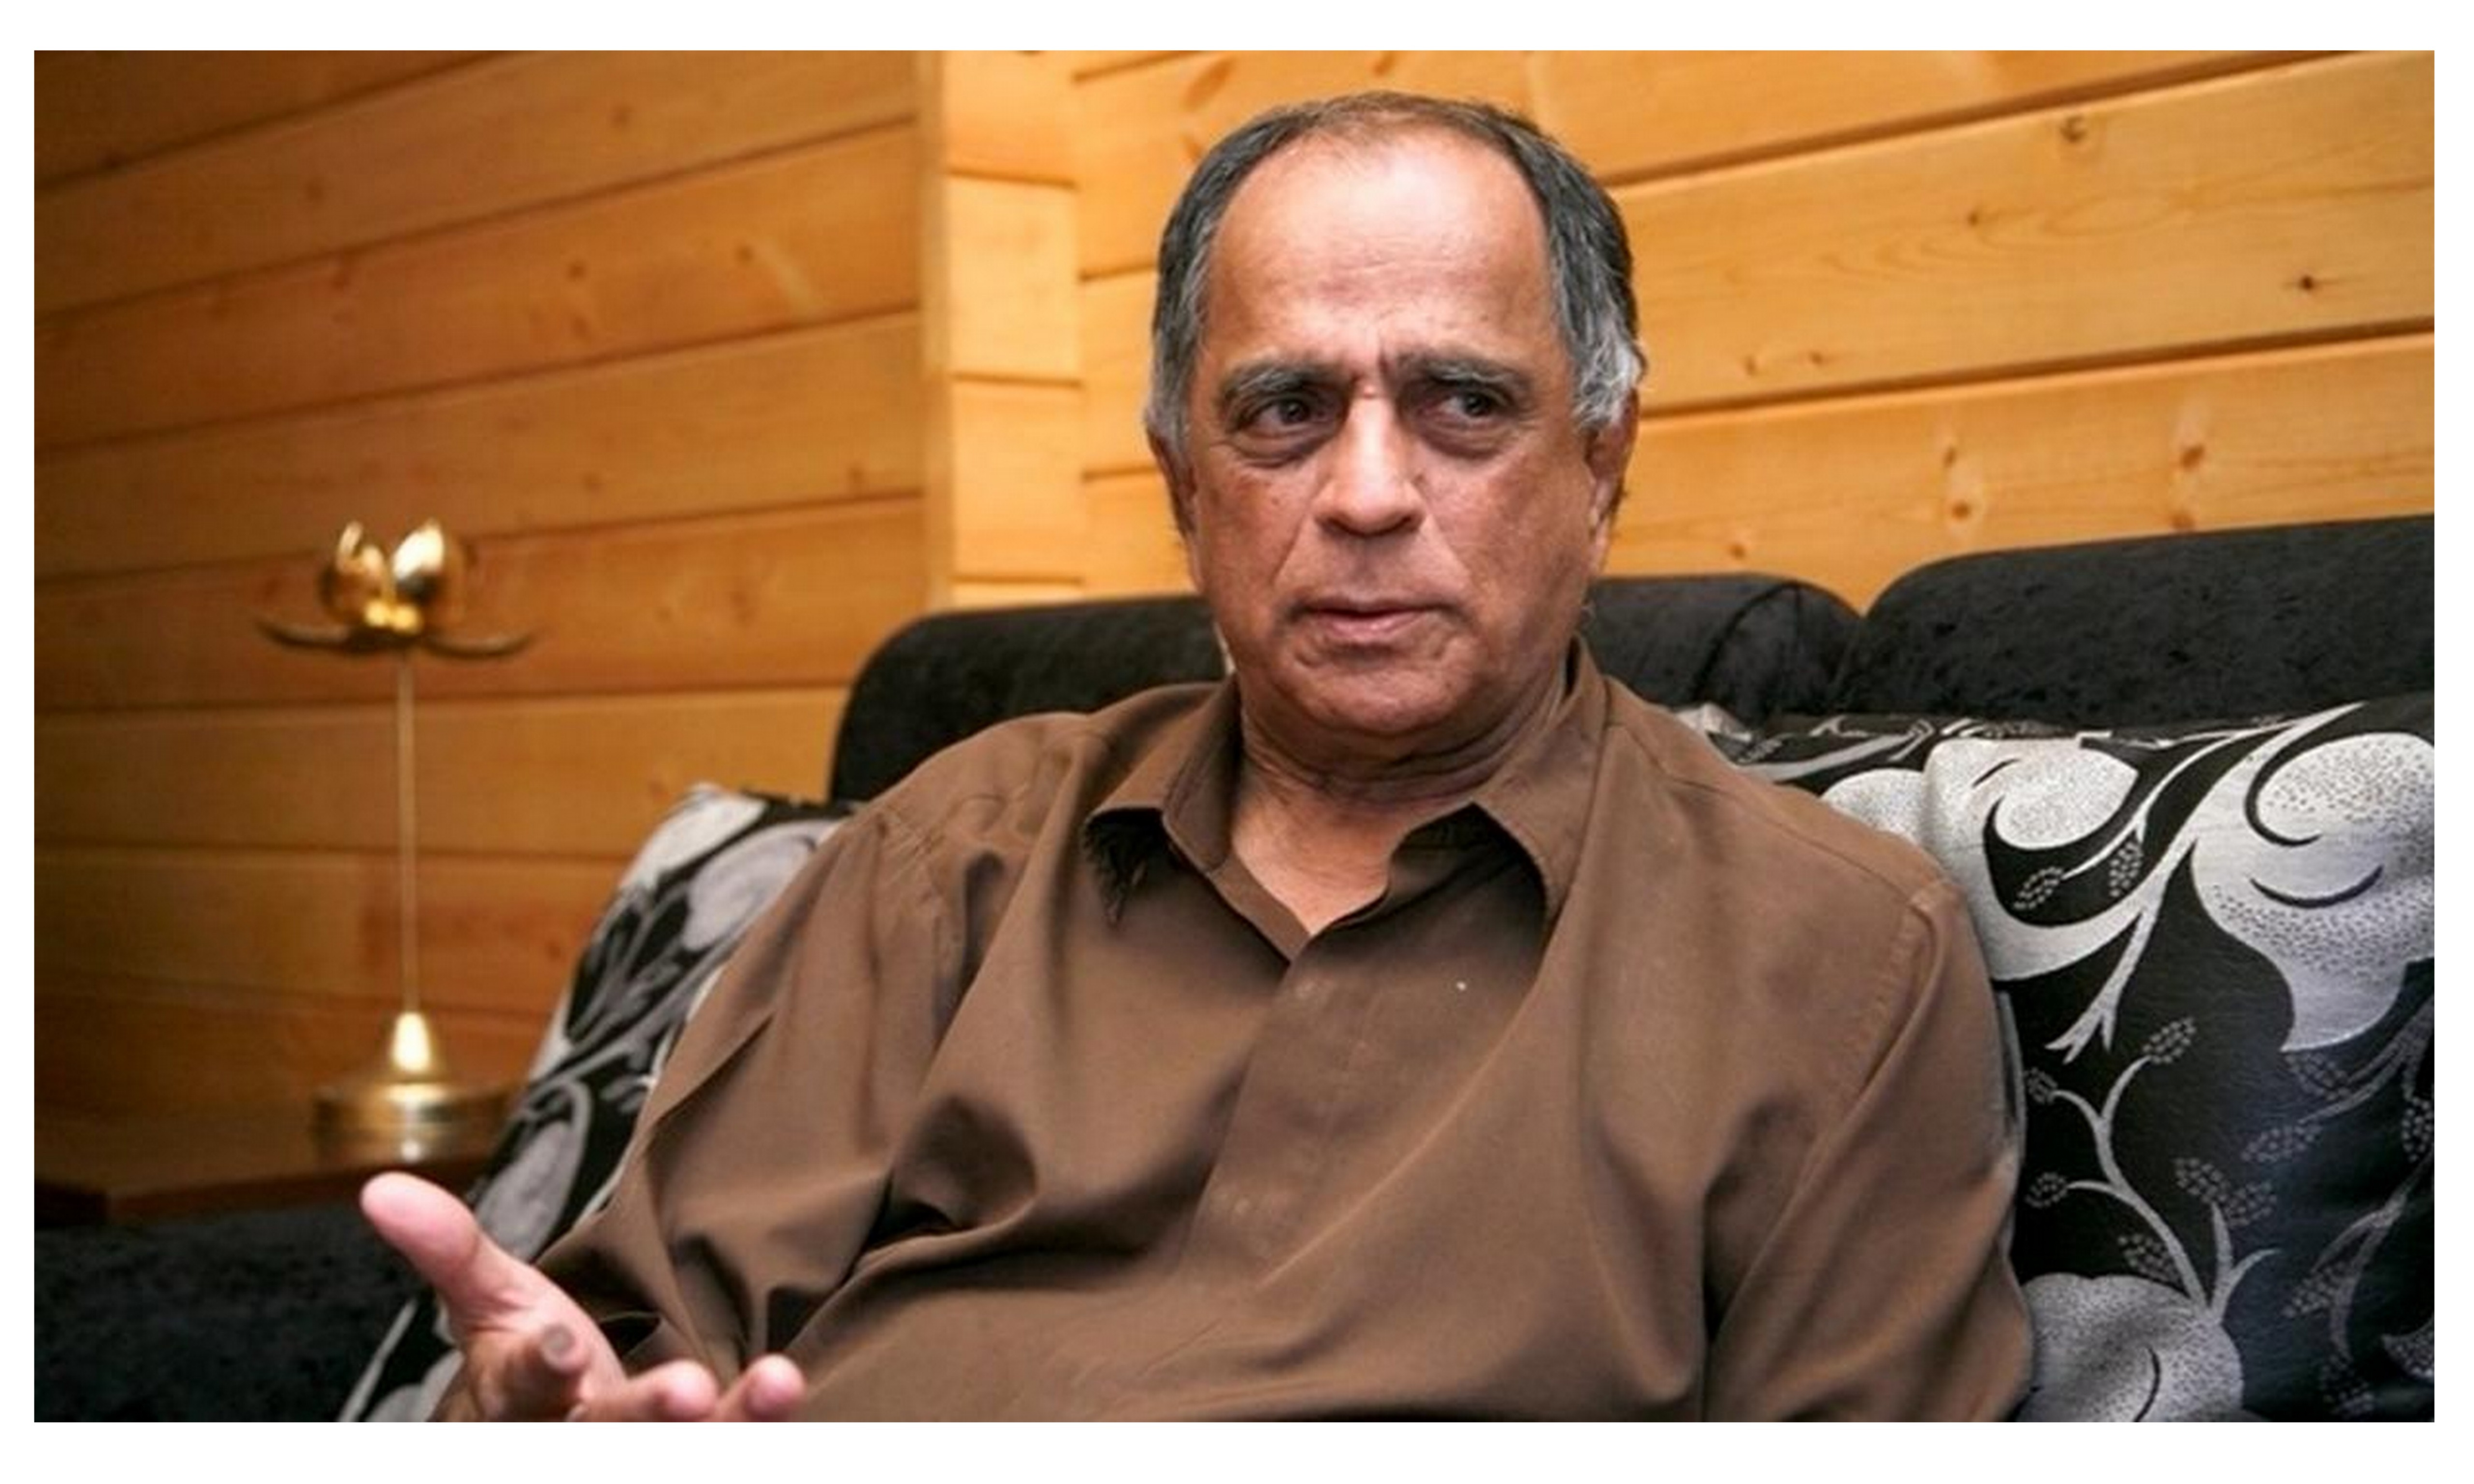 Former CBFC Chairperson and producer Pahlaj Nihalani is shocked by a Parliamentary Committee’s decision to question director Sanjay Leela Bhansali on Padmavati before the censor board can view the film. He claimed the Ministry of Information and Broadcasting had also “bullied” him during his tenure. “By all means, the Parliamentary Committee has every right to question Bhansali or any other filmmaker. But only after the Central Board of Film Certification views and certifies the film. “By questioning him before the censor certificate, you are challenging the authority of the CBFC as the final arbitrary body to decide the fate of a film,” said Nihalani. Nihalani feels the CBFC seems to have lost its authority. “During my tenure, I was bullied by the I&B Ministry into taking decisions. “Now it’s a free-for all. Any and every governing body can question a film. Where does that leave the CBFC?” As for Padmavati, Nihalani wonders where the film’s persecution stops. “To how many committees is Bhansali answerable? And where does this end? “Why is one of India’s best filmmakers being made to explain himself over and over again? And why is the CBFC not taking steps to clear the air once and for all,” questioned Nihalani, whose own tenure as the CBFC chief was dogged by controversies. Padmavati, based on the life of legendary queen Padmini of Chittor, has been in controversy for a year now with various Rajput groups like Shri Rajput Karni Sena accusing Sanjay Leela Bhansali of distorting history and playing with the sentiments of people. From demands to ban the film to open death threats, things have only gotten uglier for the team of Padmavati.